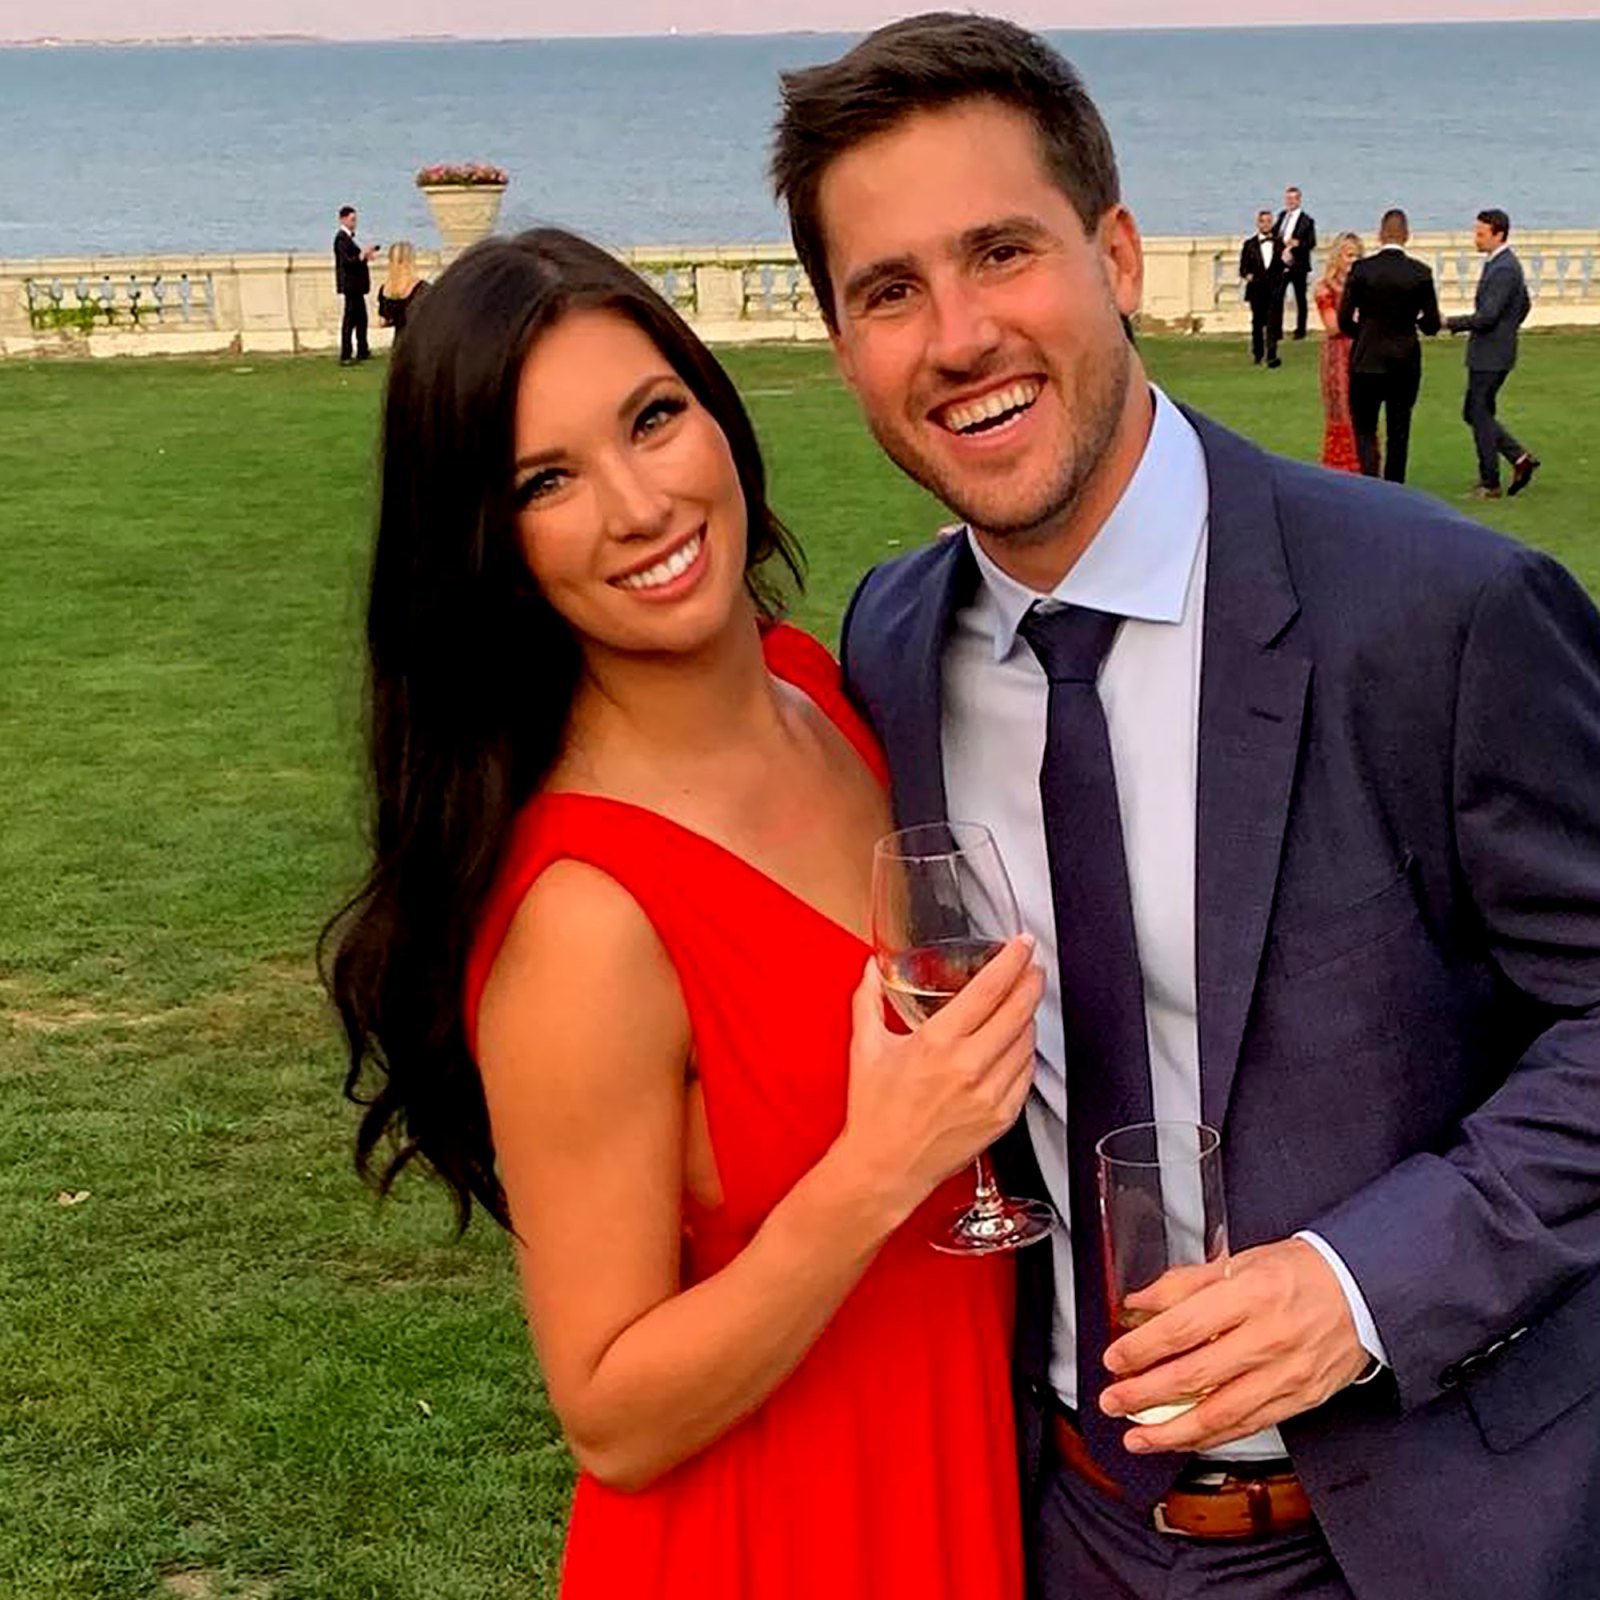 Bachelorette’s JJ Lane Welcomes 1st Baby With Wife Kayla Hughes, His 2nd